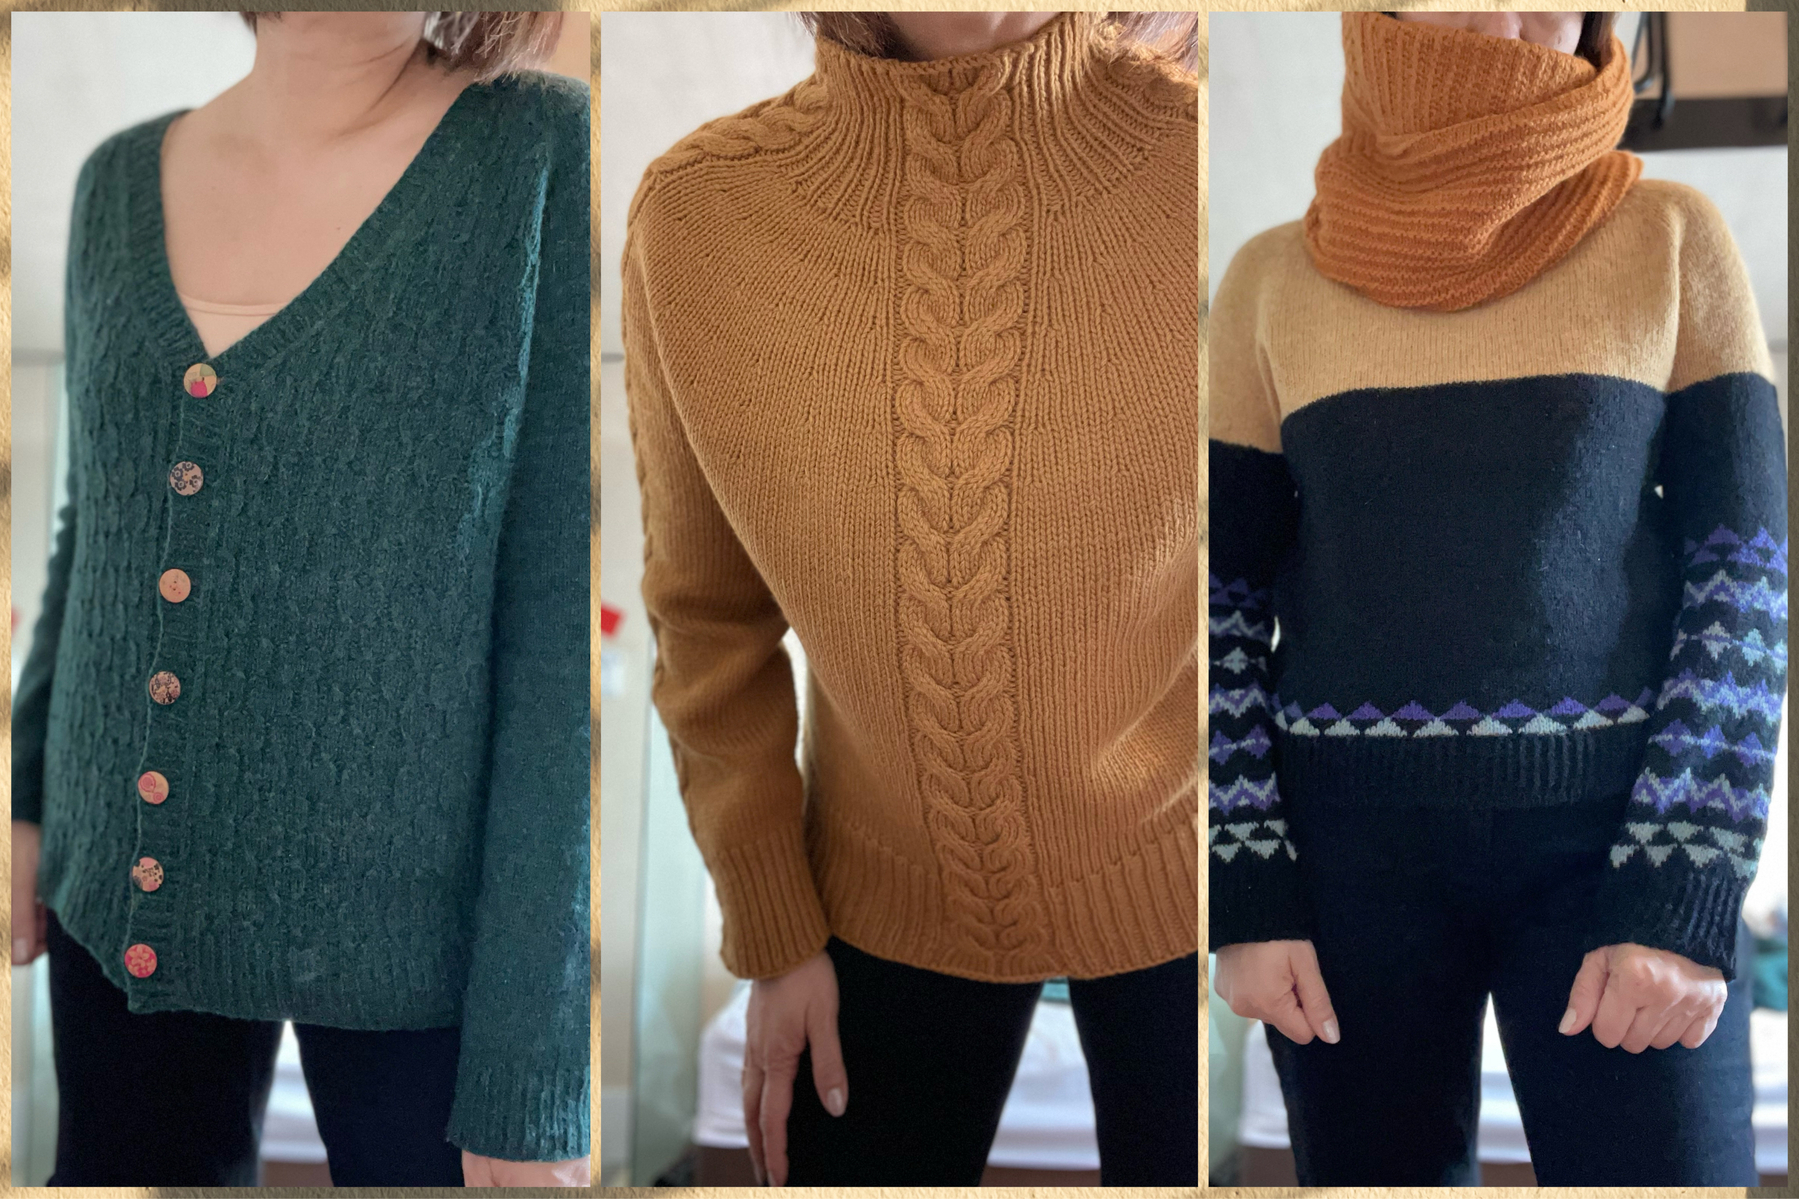 A collage of three sweaters and an accessory that I knitted for myself